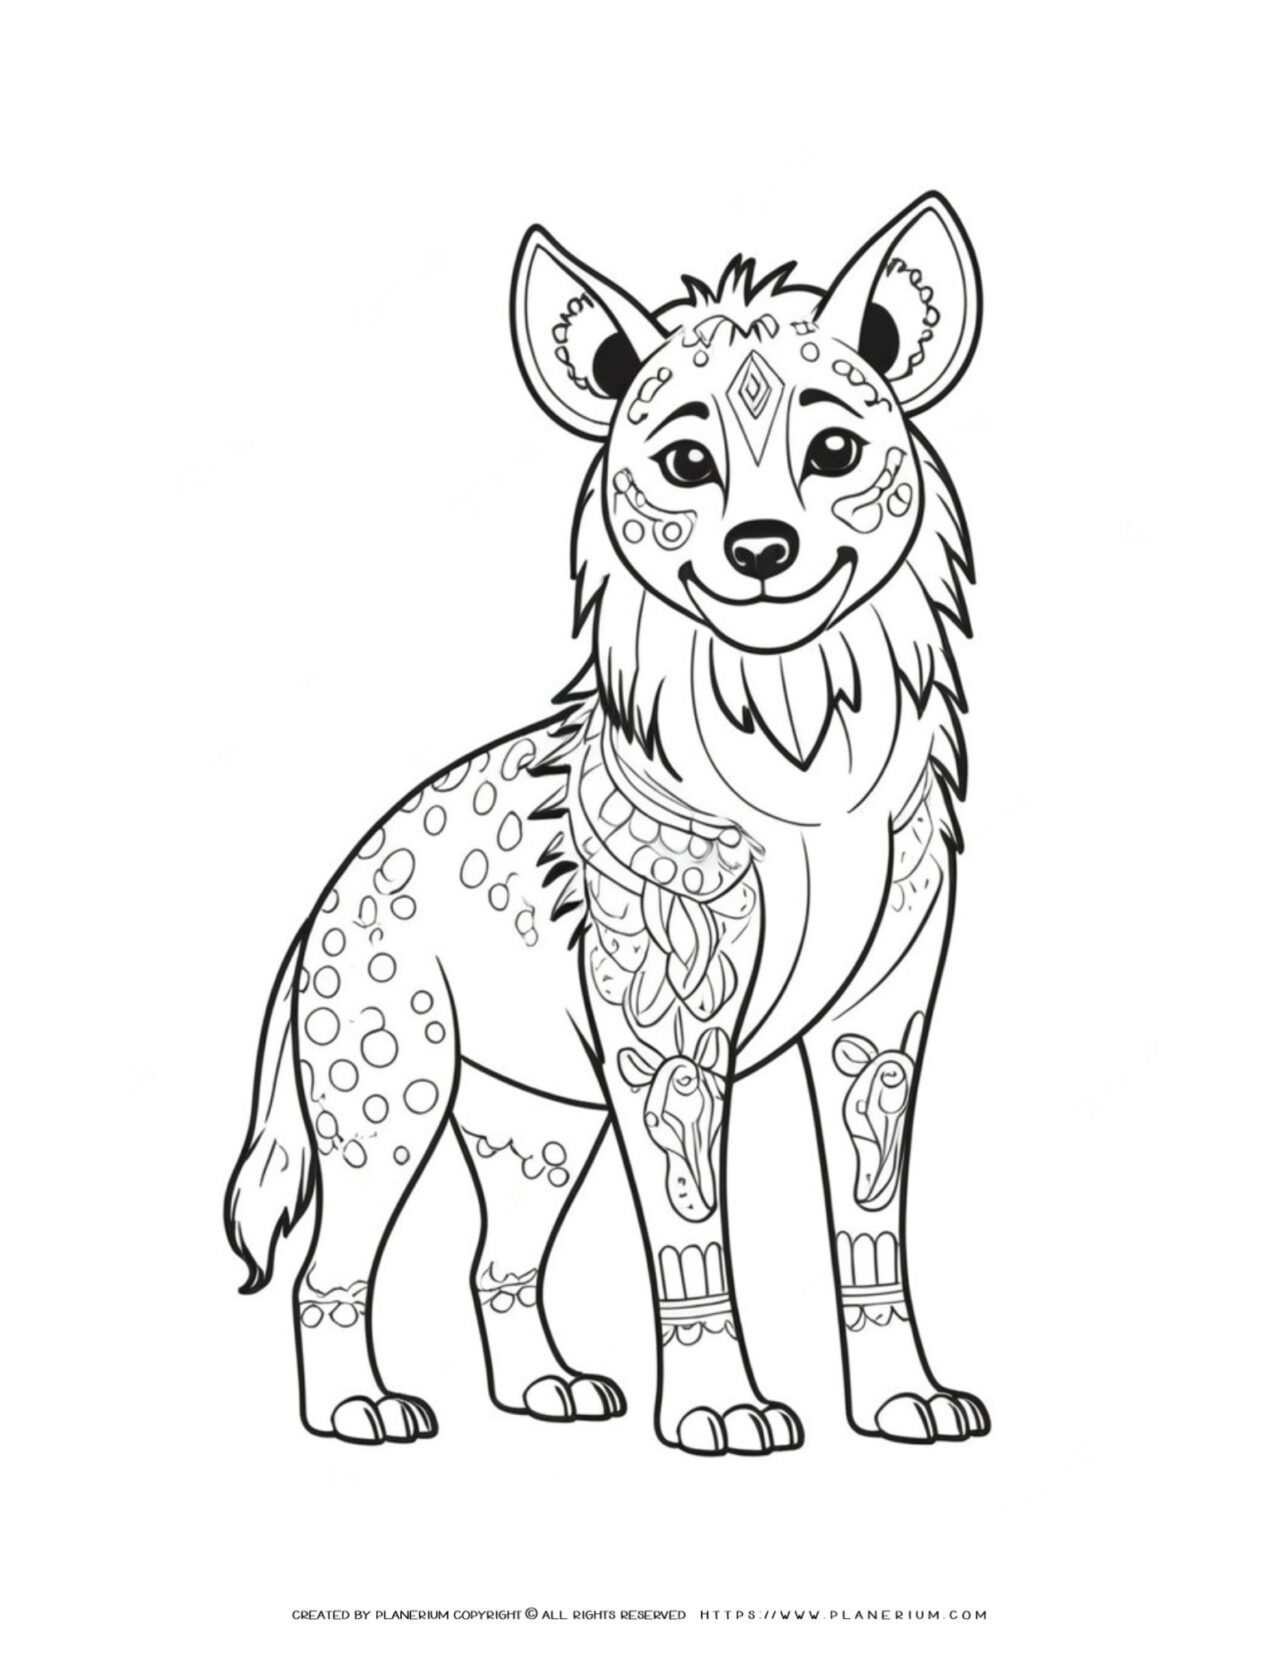 Intricate-Hyena-Coloring-Page-with-Tribal-Tattoos